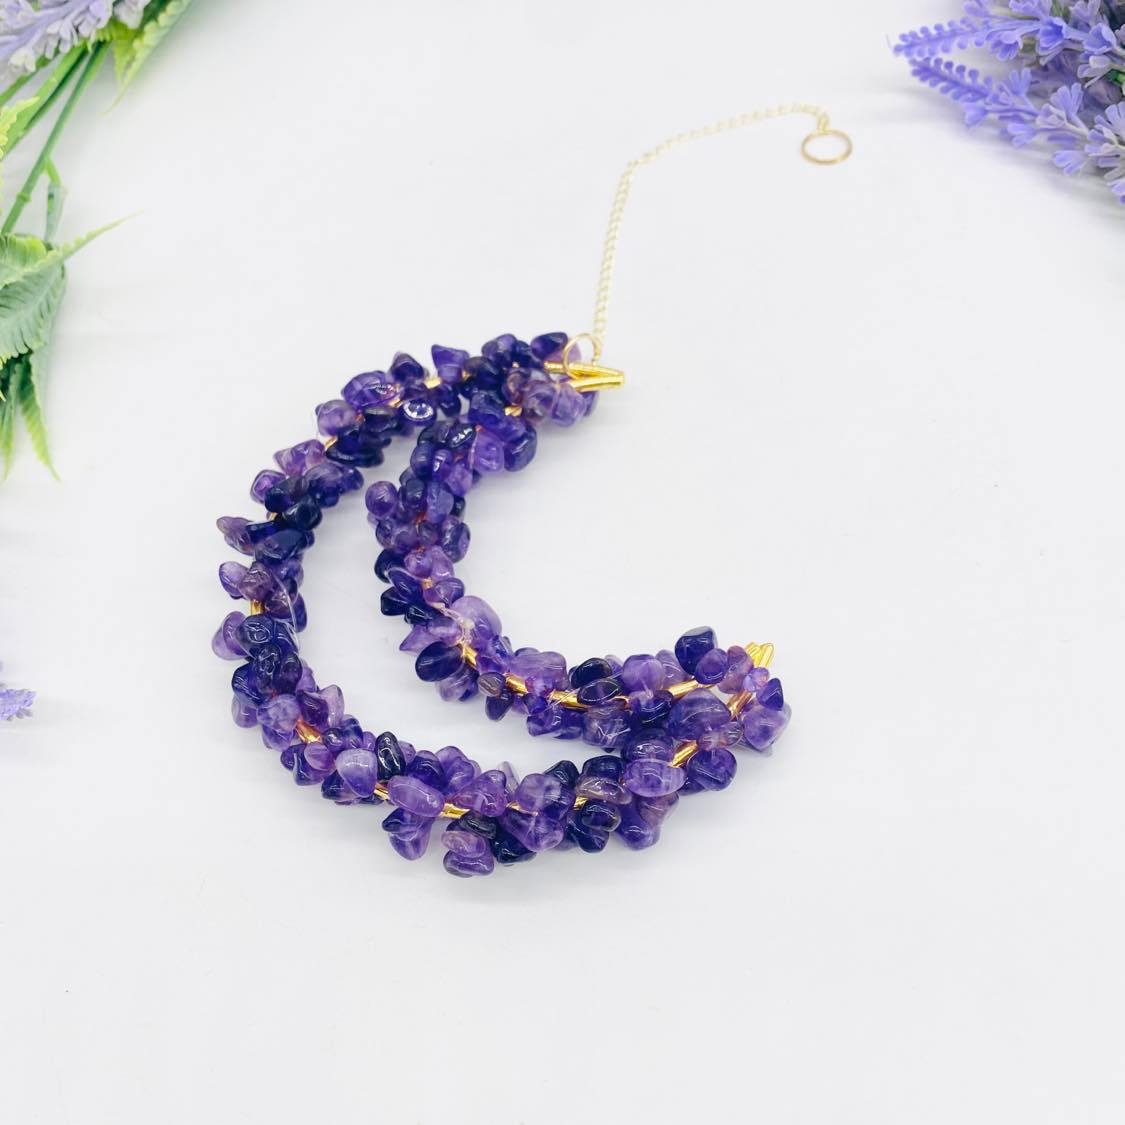 Amethyst Suncatcher, Crystal Hanging, Wall Hanging, Home Decor, Crescent Moon Hanging, Wired Crysal Hanging, Gift For Her